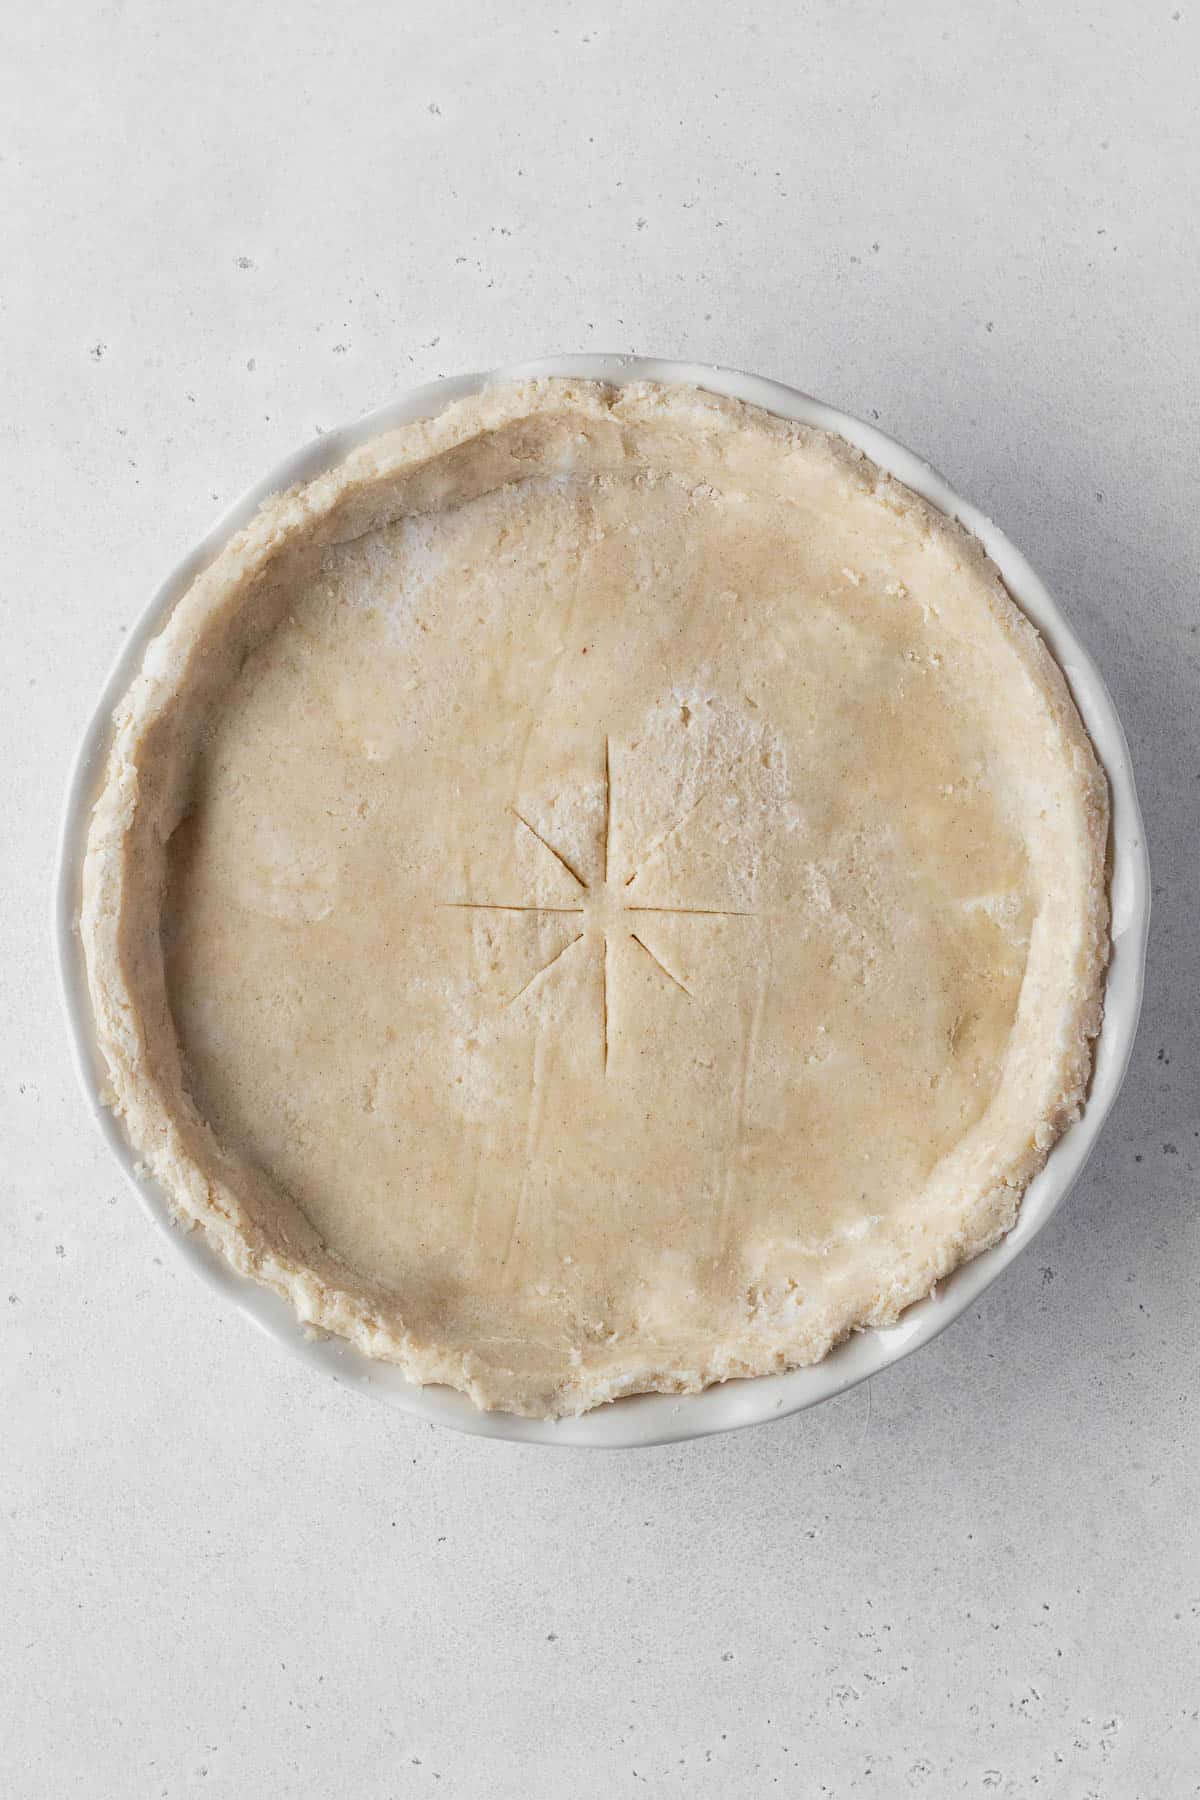 An unbaked pot pie on a grey surface.